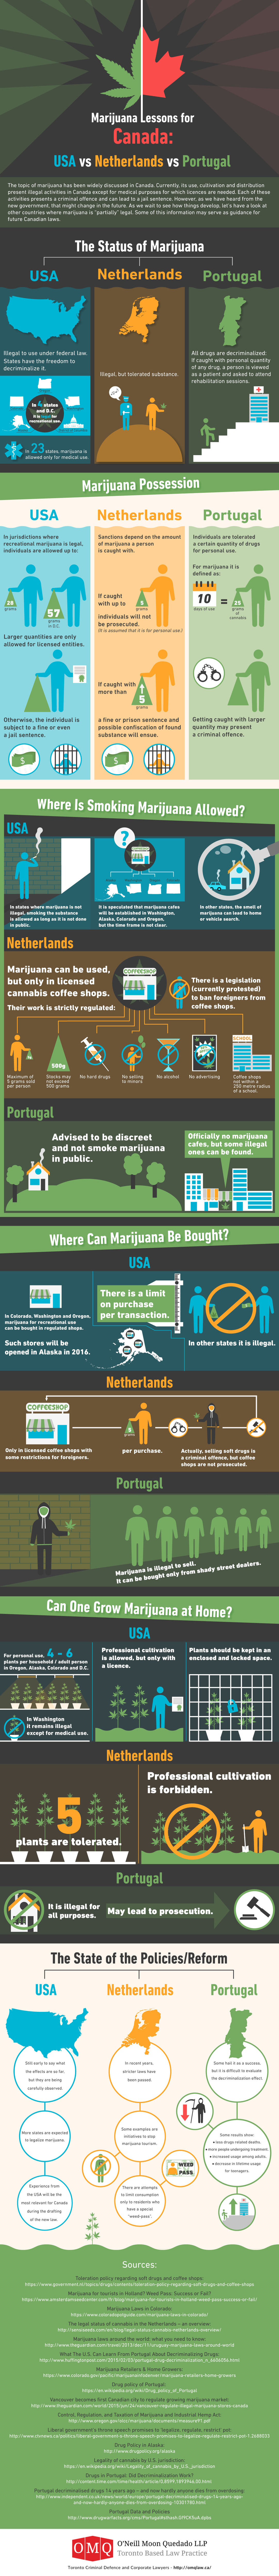 Cannabis regulation in the USA, Portugal and the Netherlands